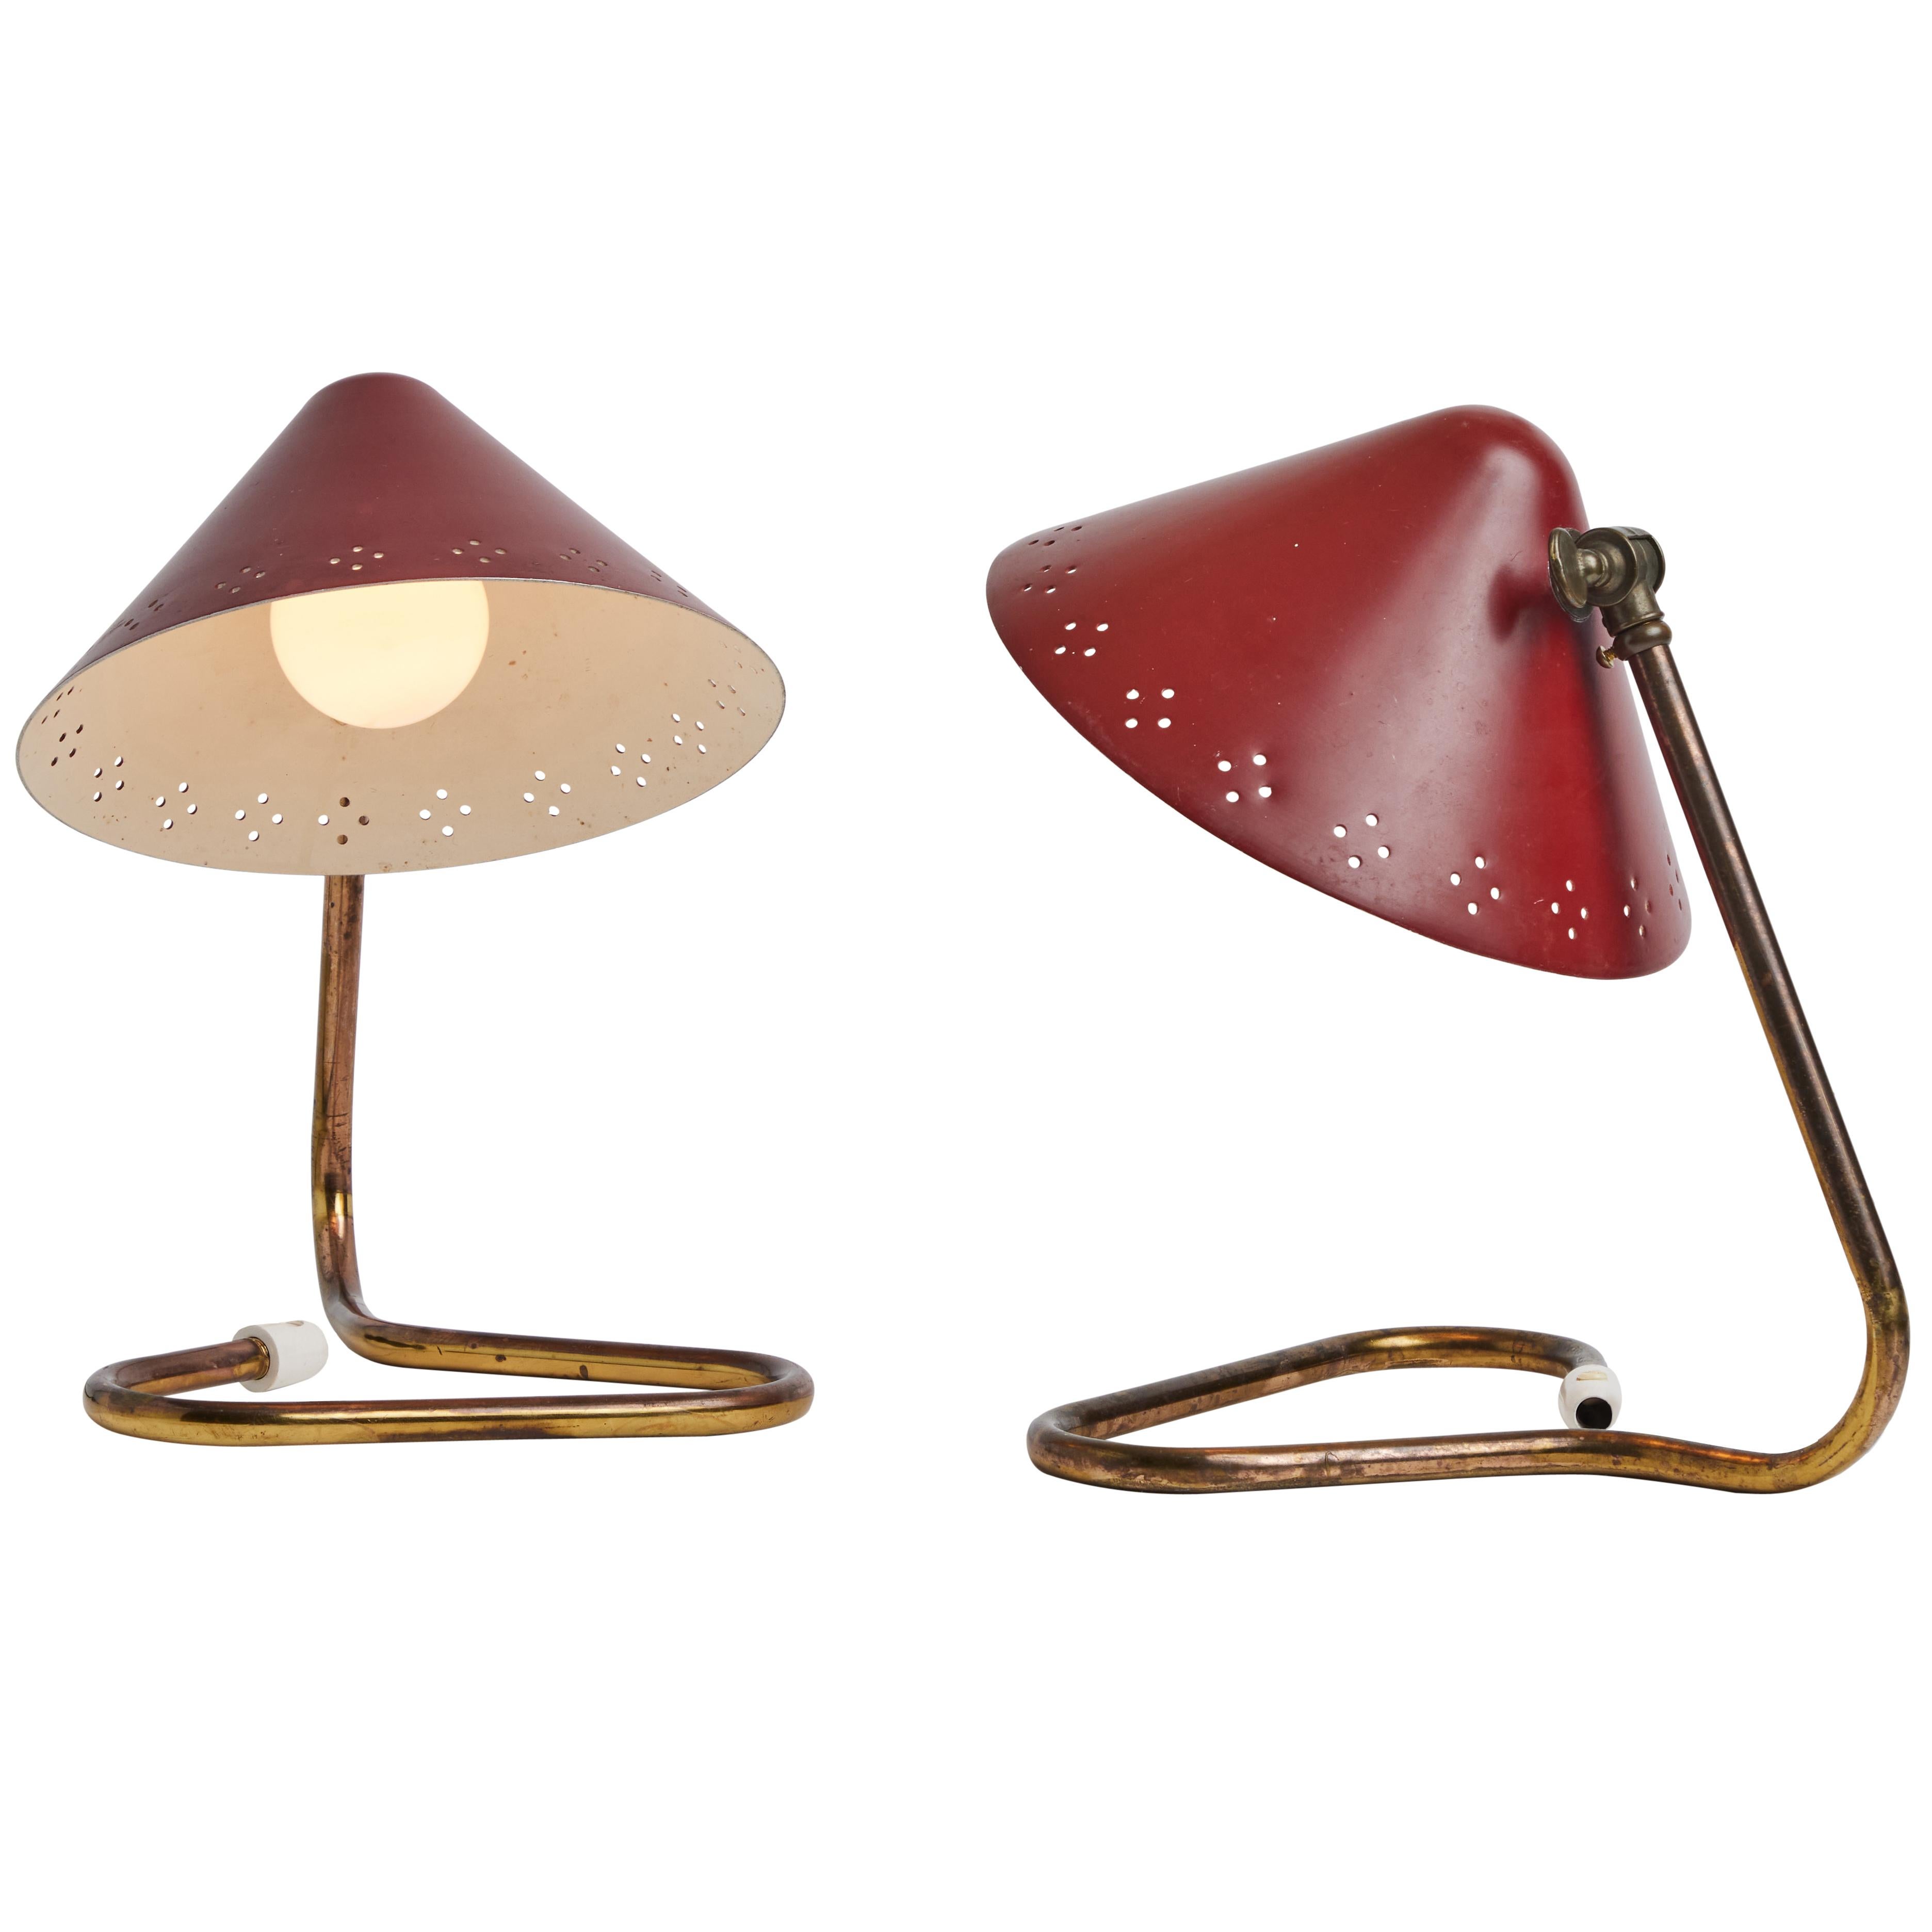 Painted 1950s Erik Warna 'GK14' Red Perforated Shade Table Lamps